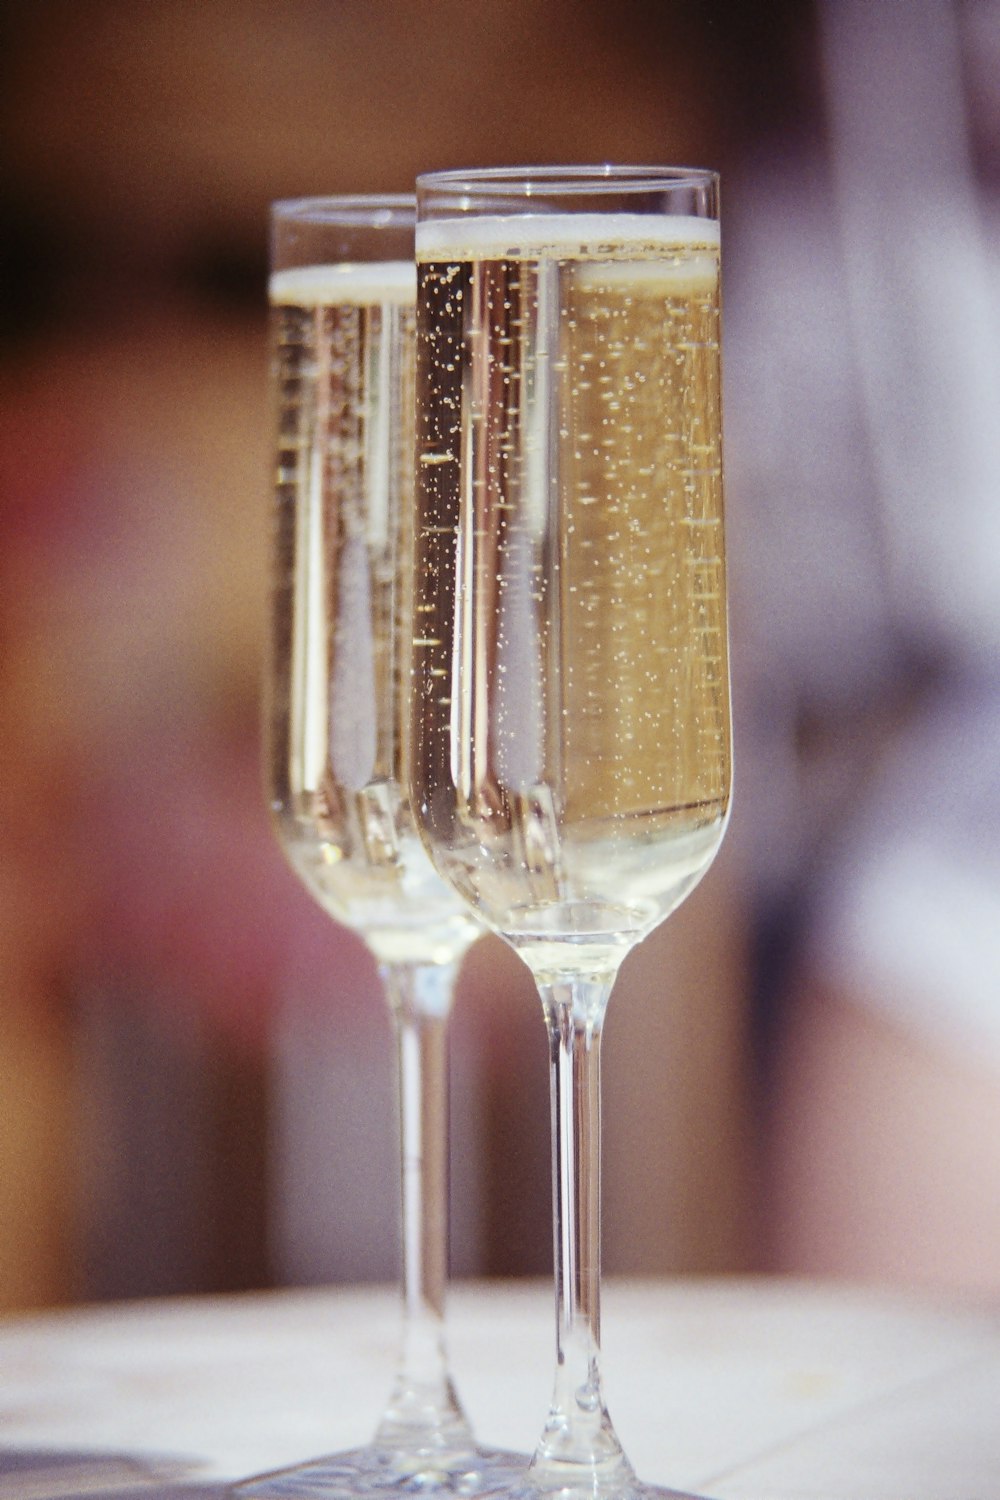 218+ Thousand Champagne Glasses Royalty-Free Images, Stock Photos